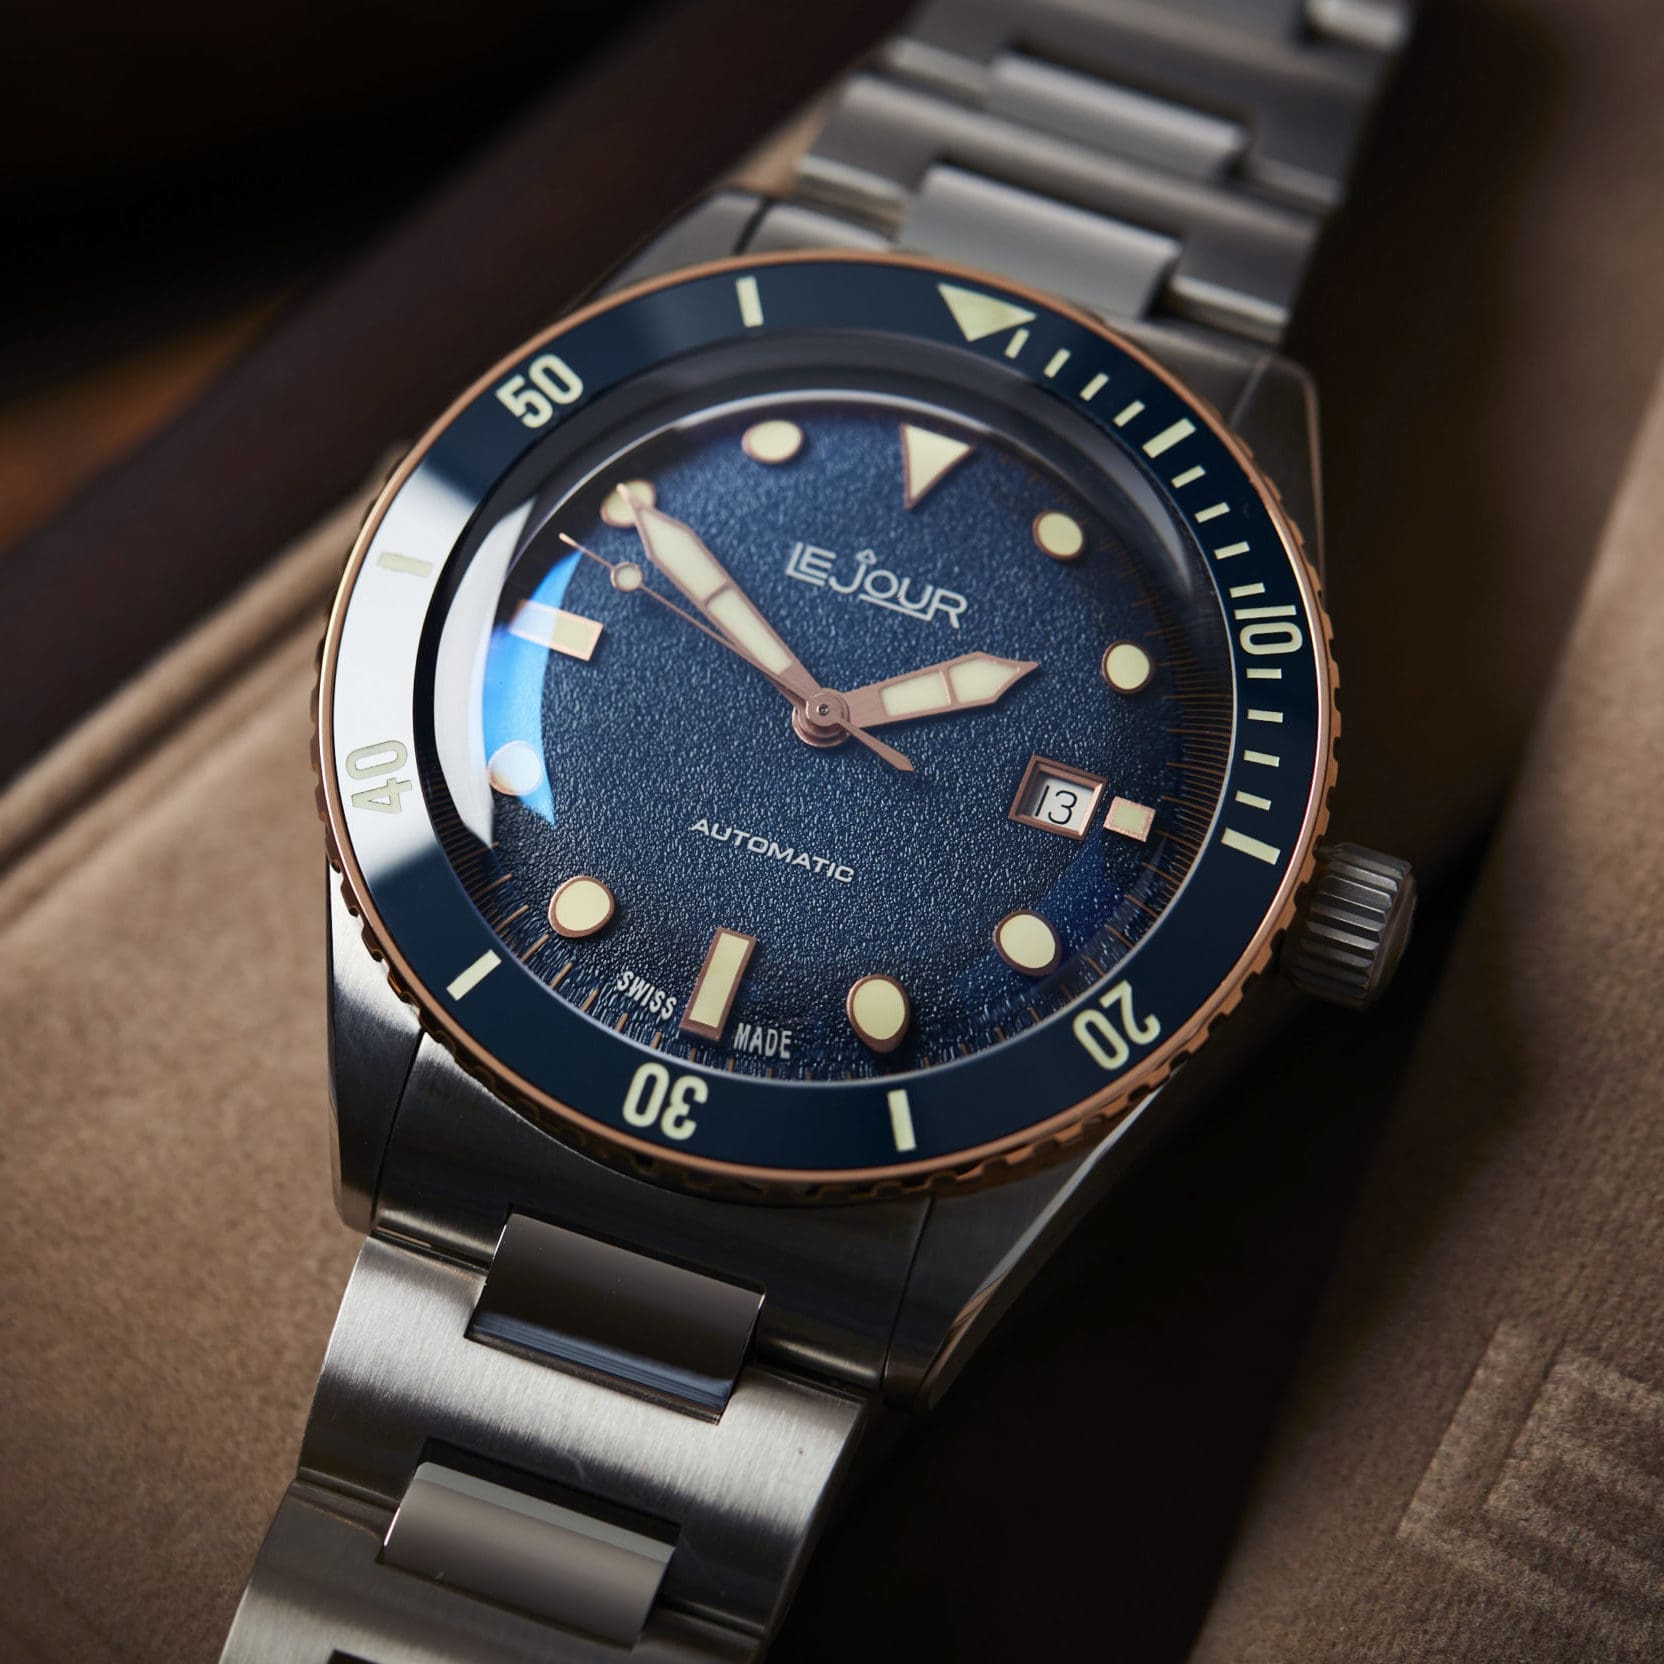 The LeJour Seacolt Diver is a modern dive watch with vintage swagger